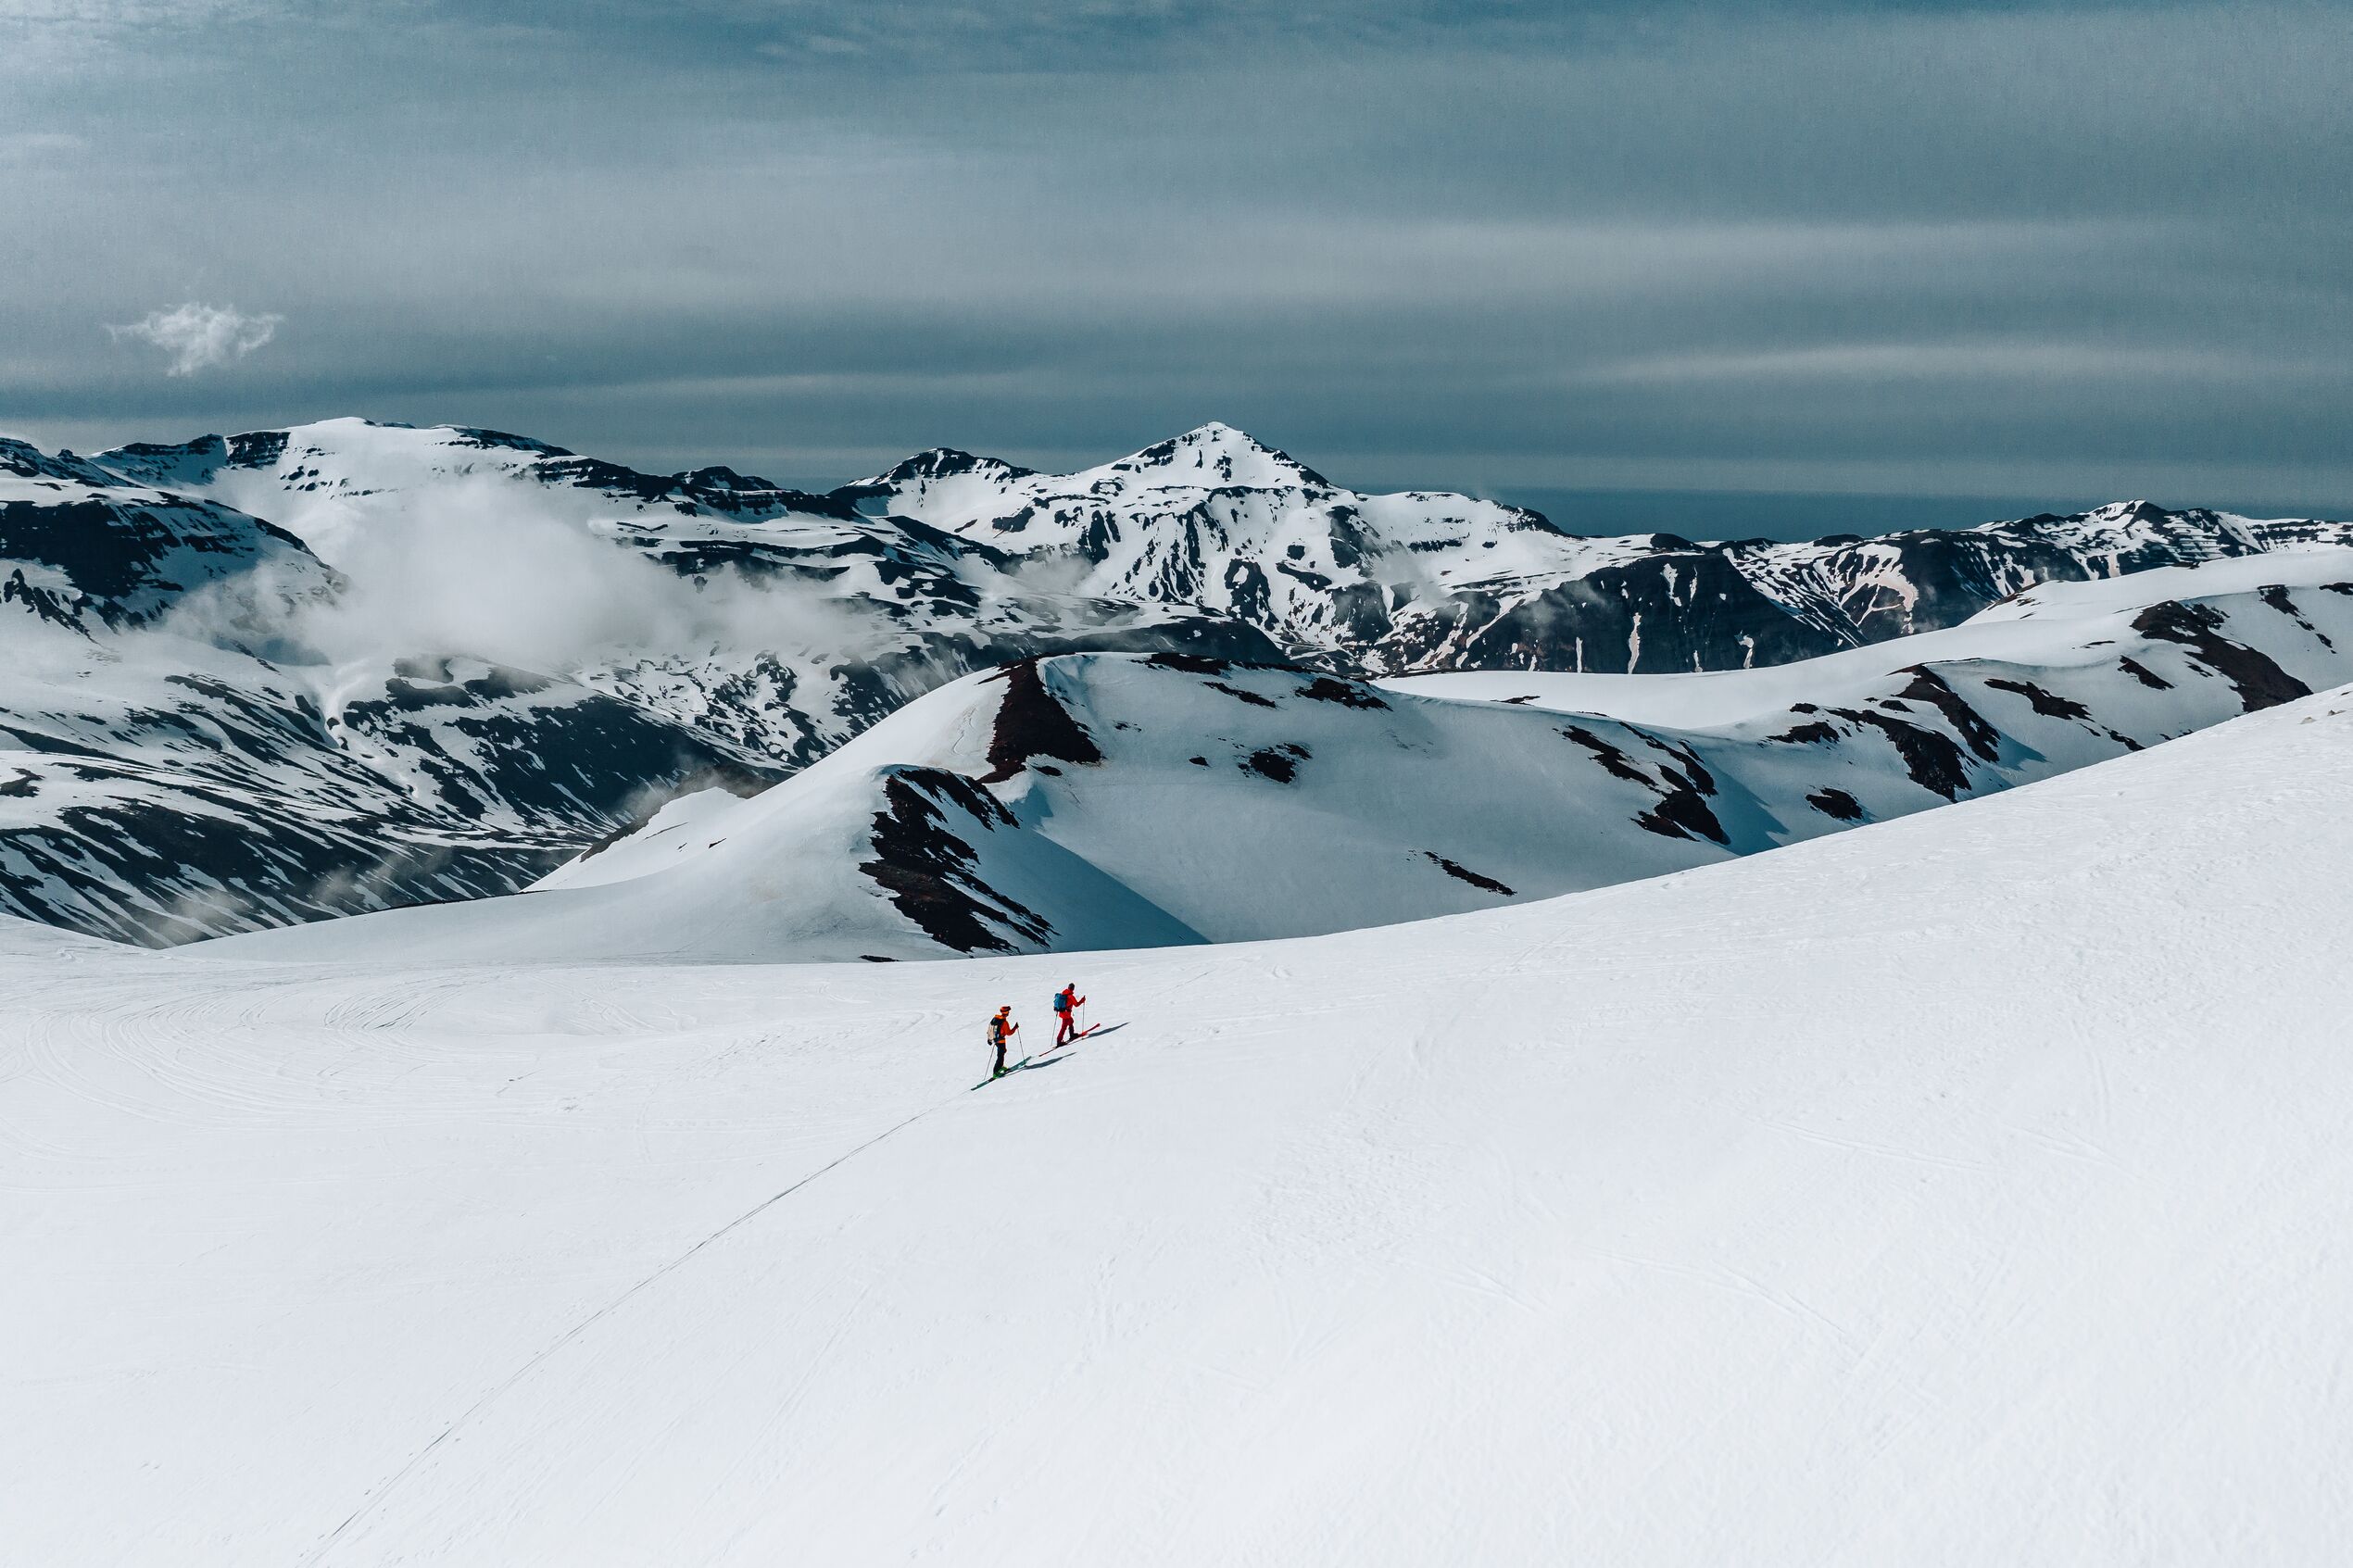 A distance shot of two skiers on a snowy mountain in North Iceland, with mountainscapes as a backdrop